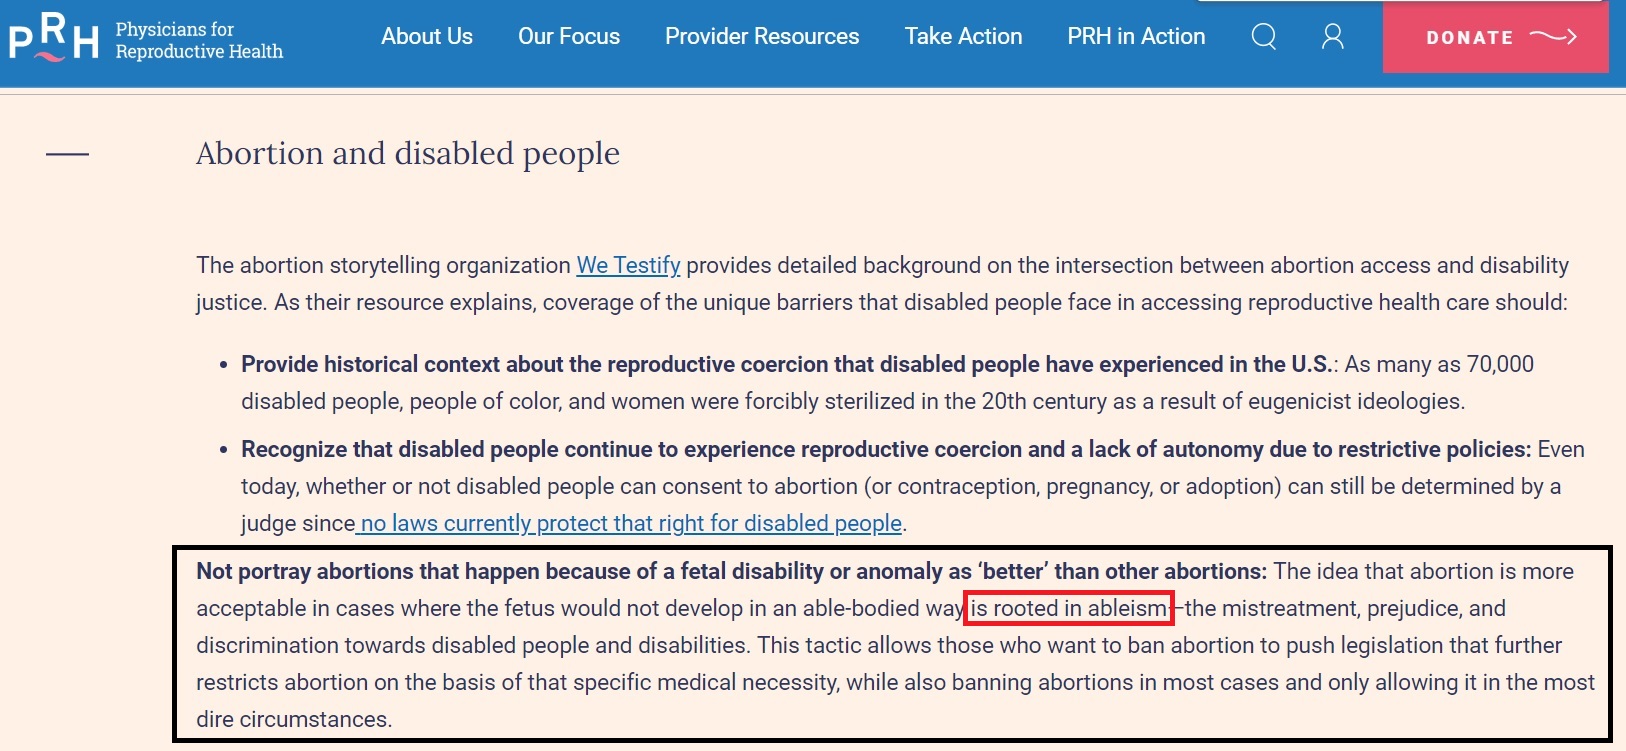 Image: Physicians for Reproductive Health PRH abortion language ableism and disability